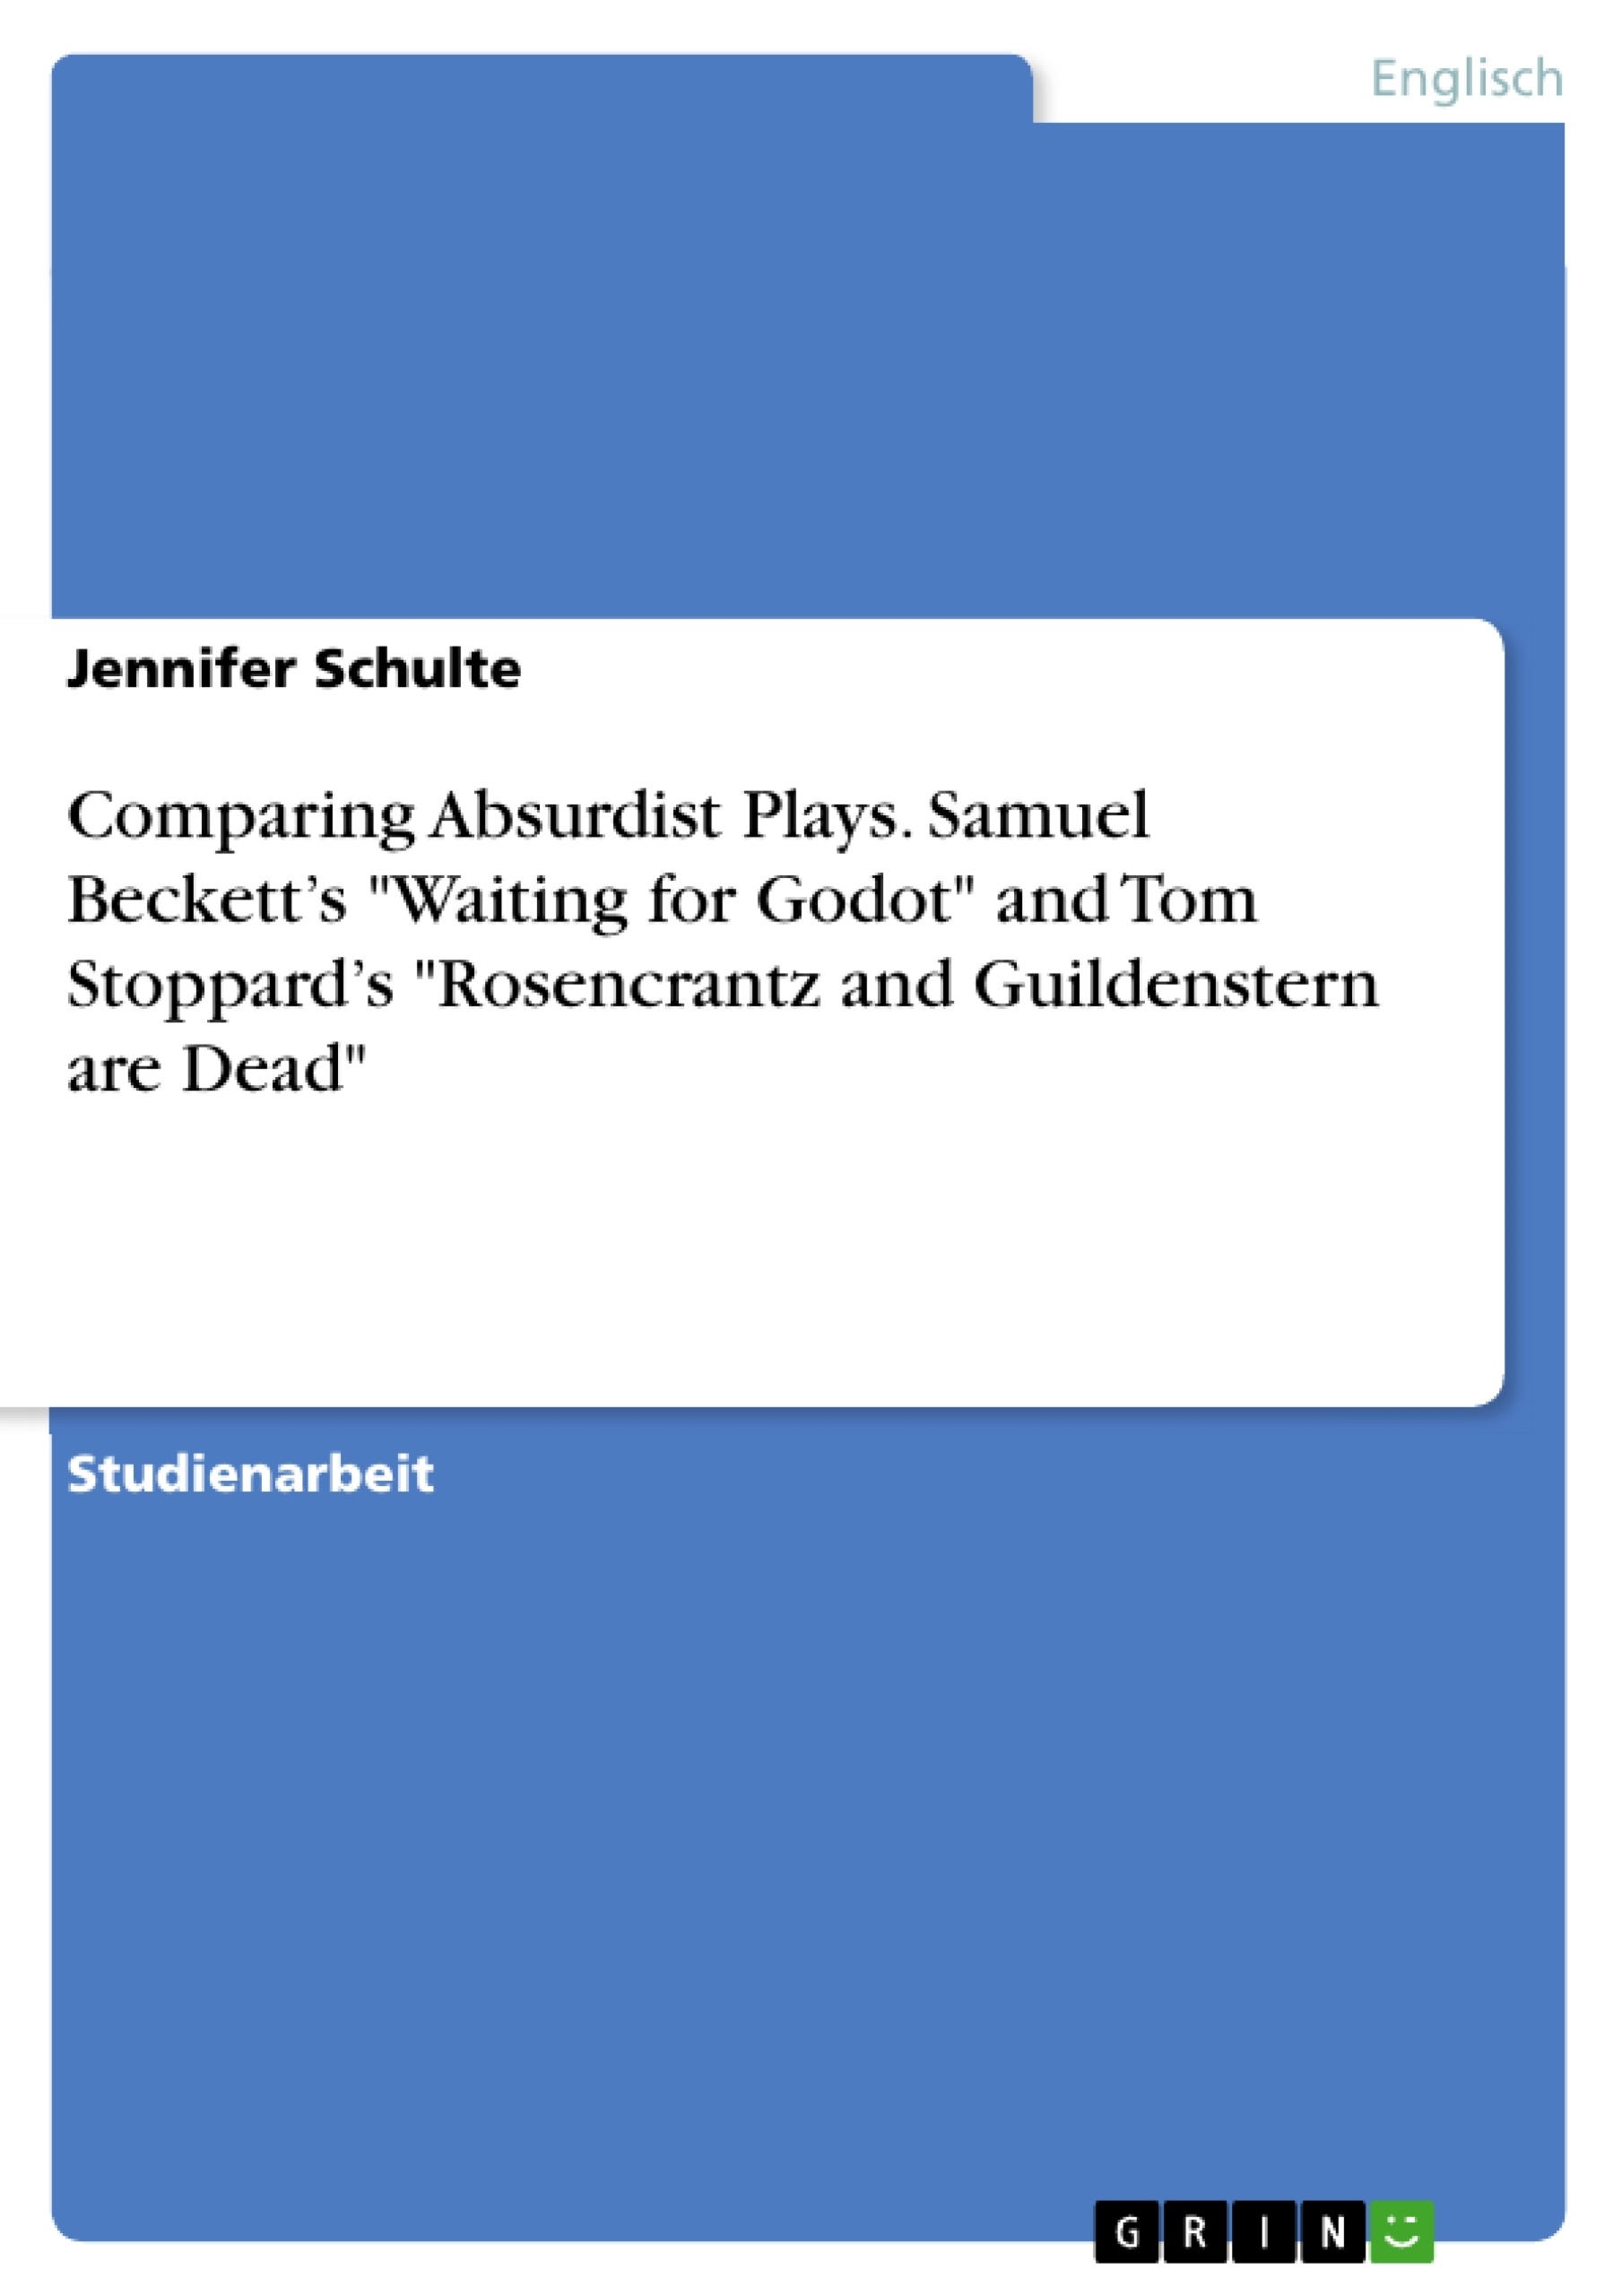 Titel: Comparing Absurdist Plays. Samuel Beckett’s "Waiting for Godot" and Tom Stoppard’s "Rosencrantz and Guildenstern are Dead"